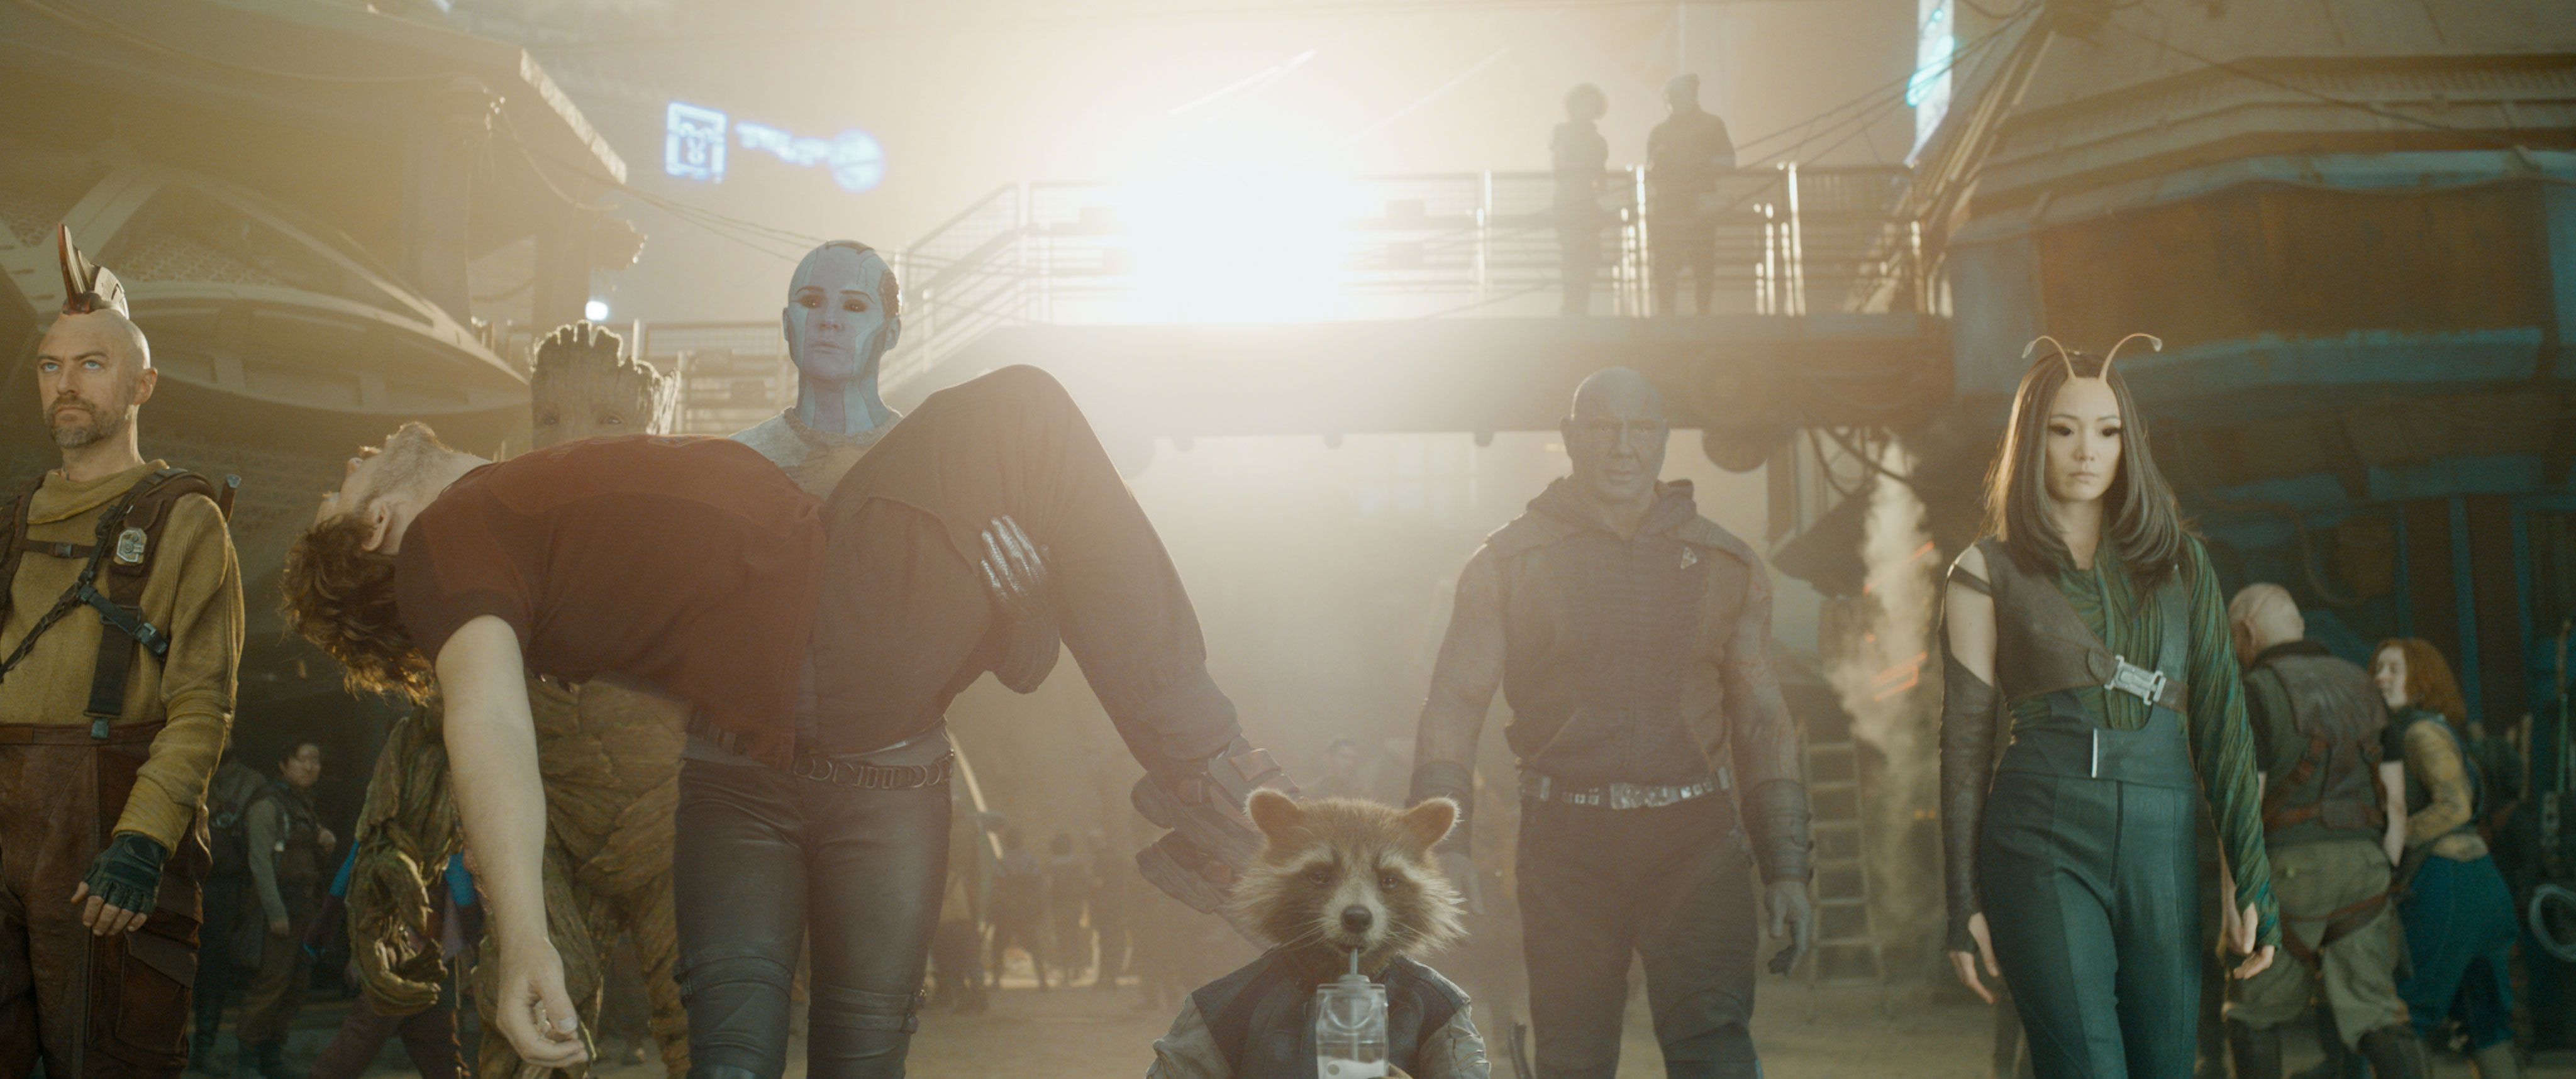 Guardians of the Galaxy 3 reviews: the man tapped to save the